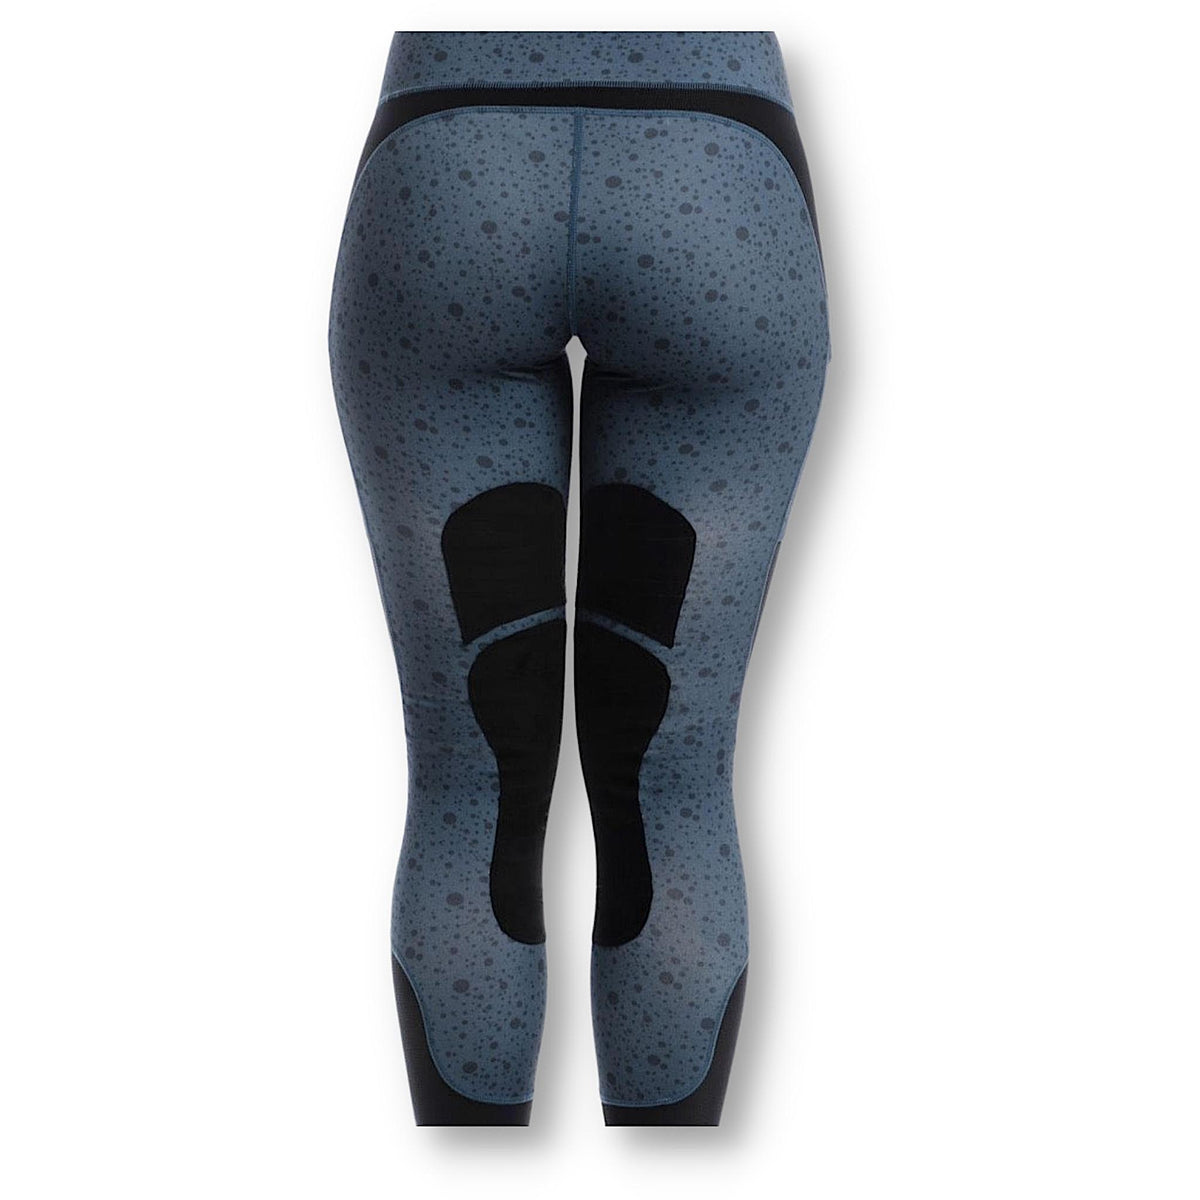 Back of steel-blue riding tights with black suede grip on inner leg.